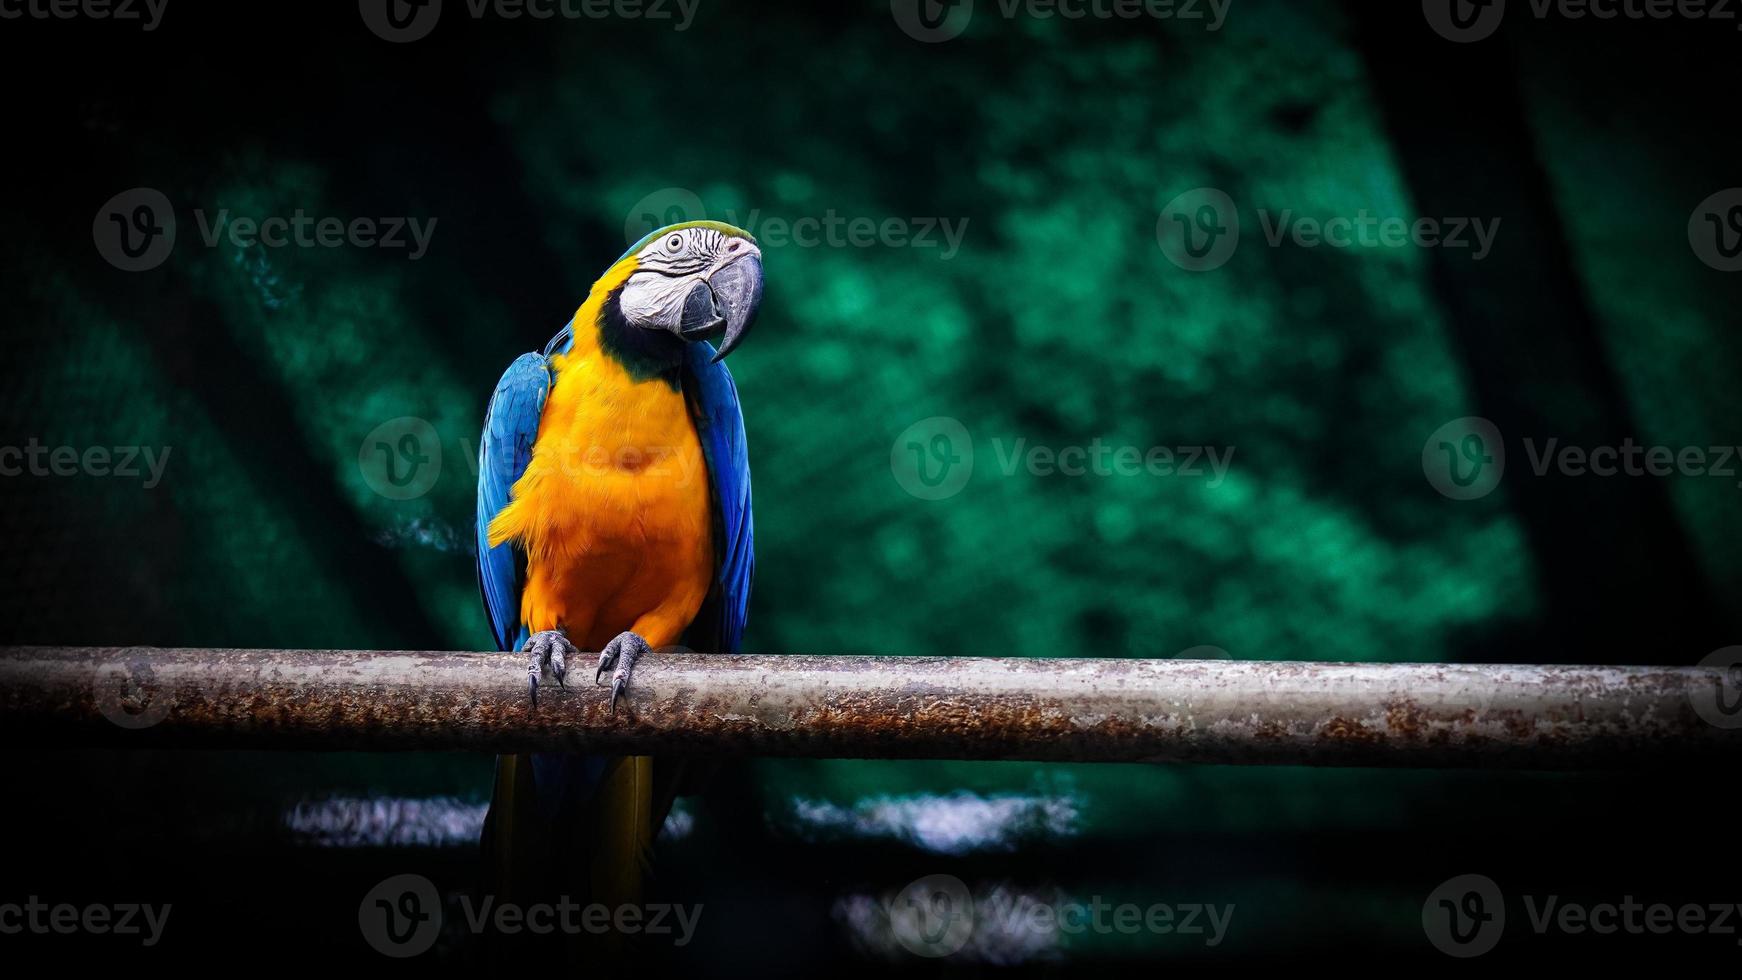 The blue-and-yellow macaw photo